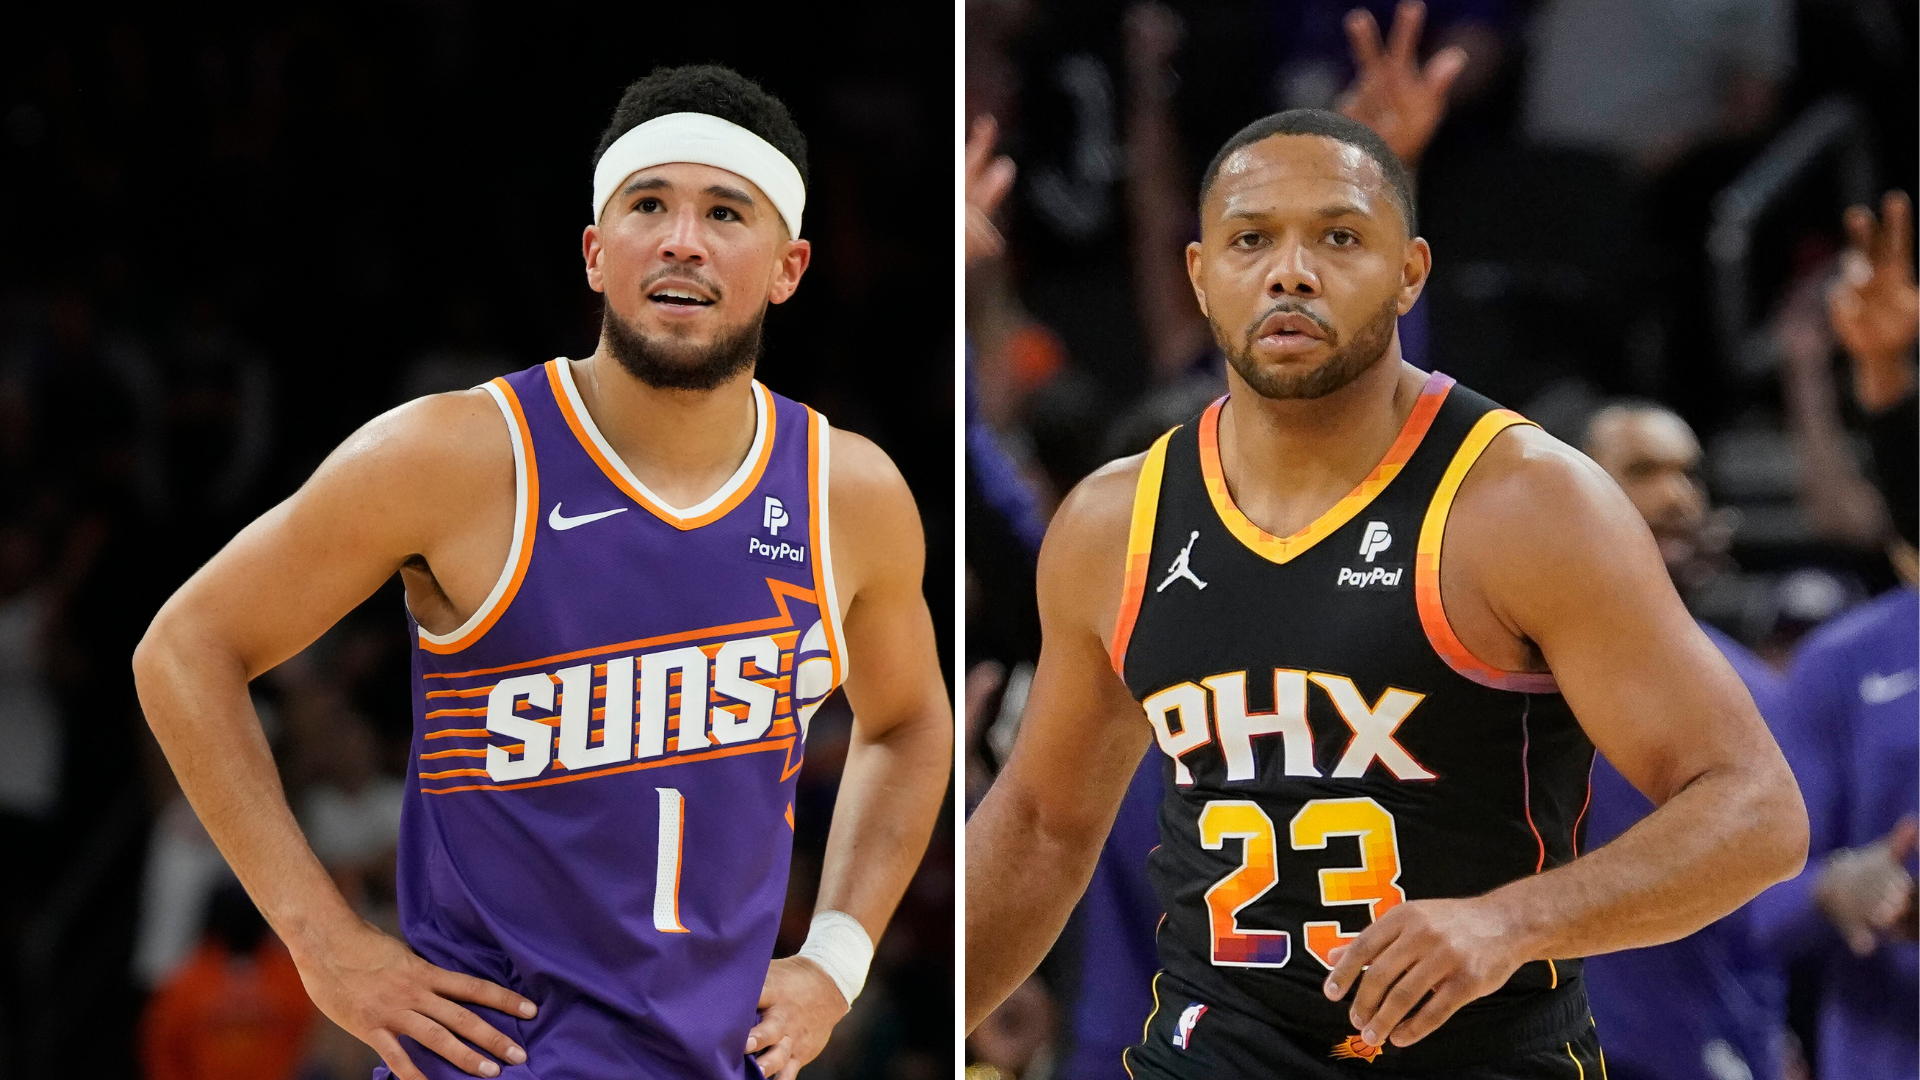 Which players who have played for the Phoenix Suns and hit a game